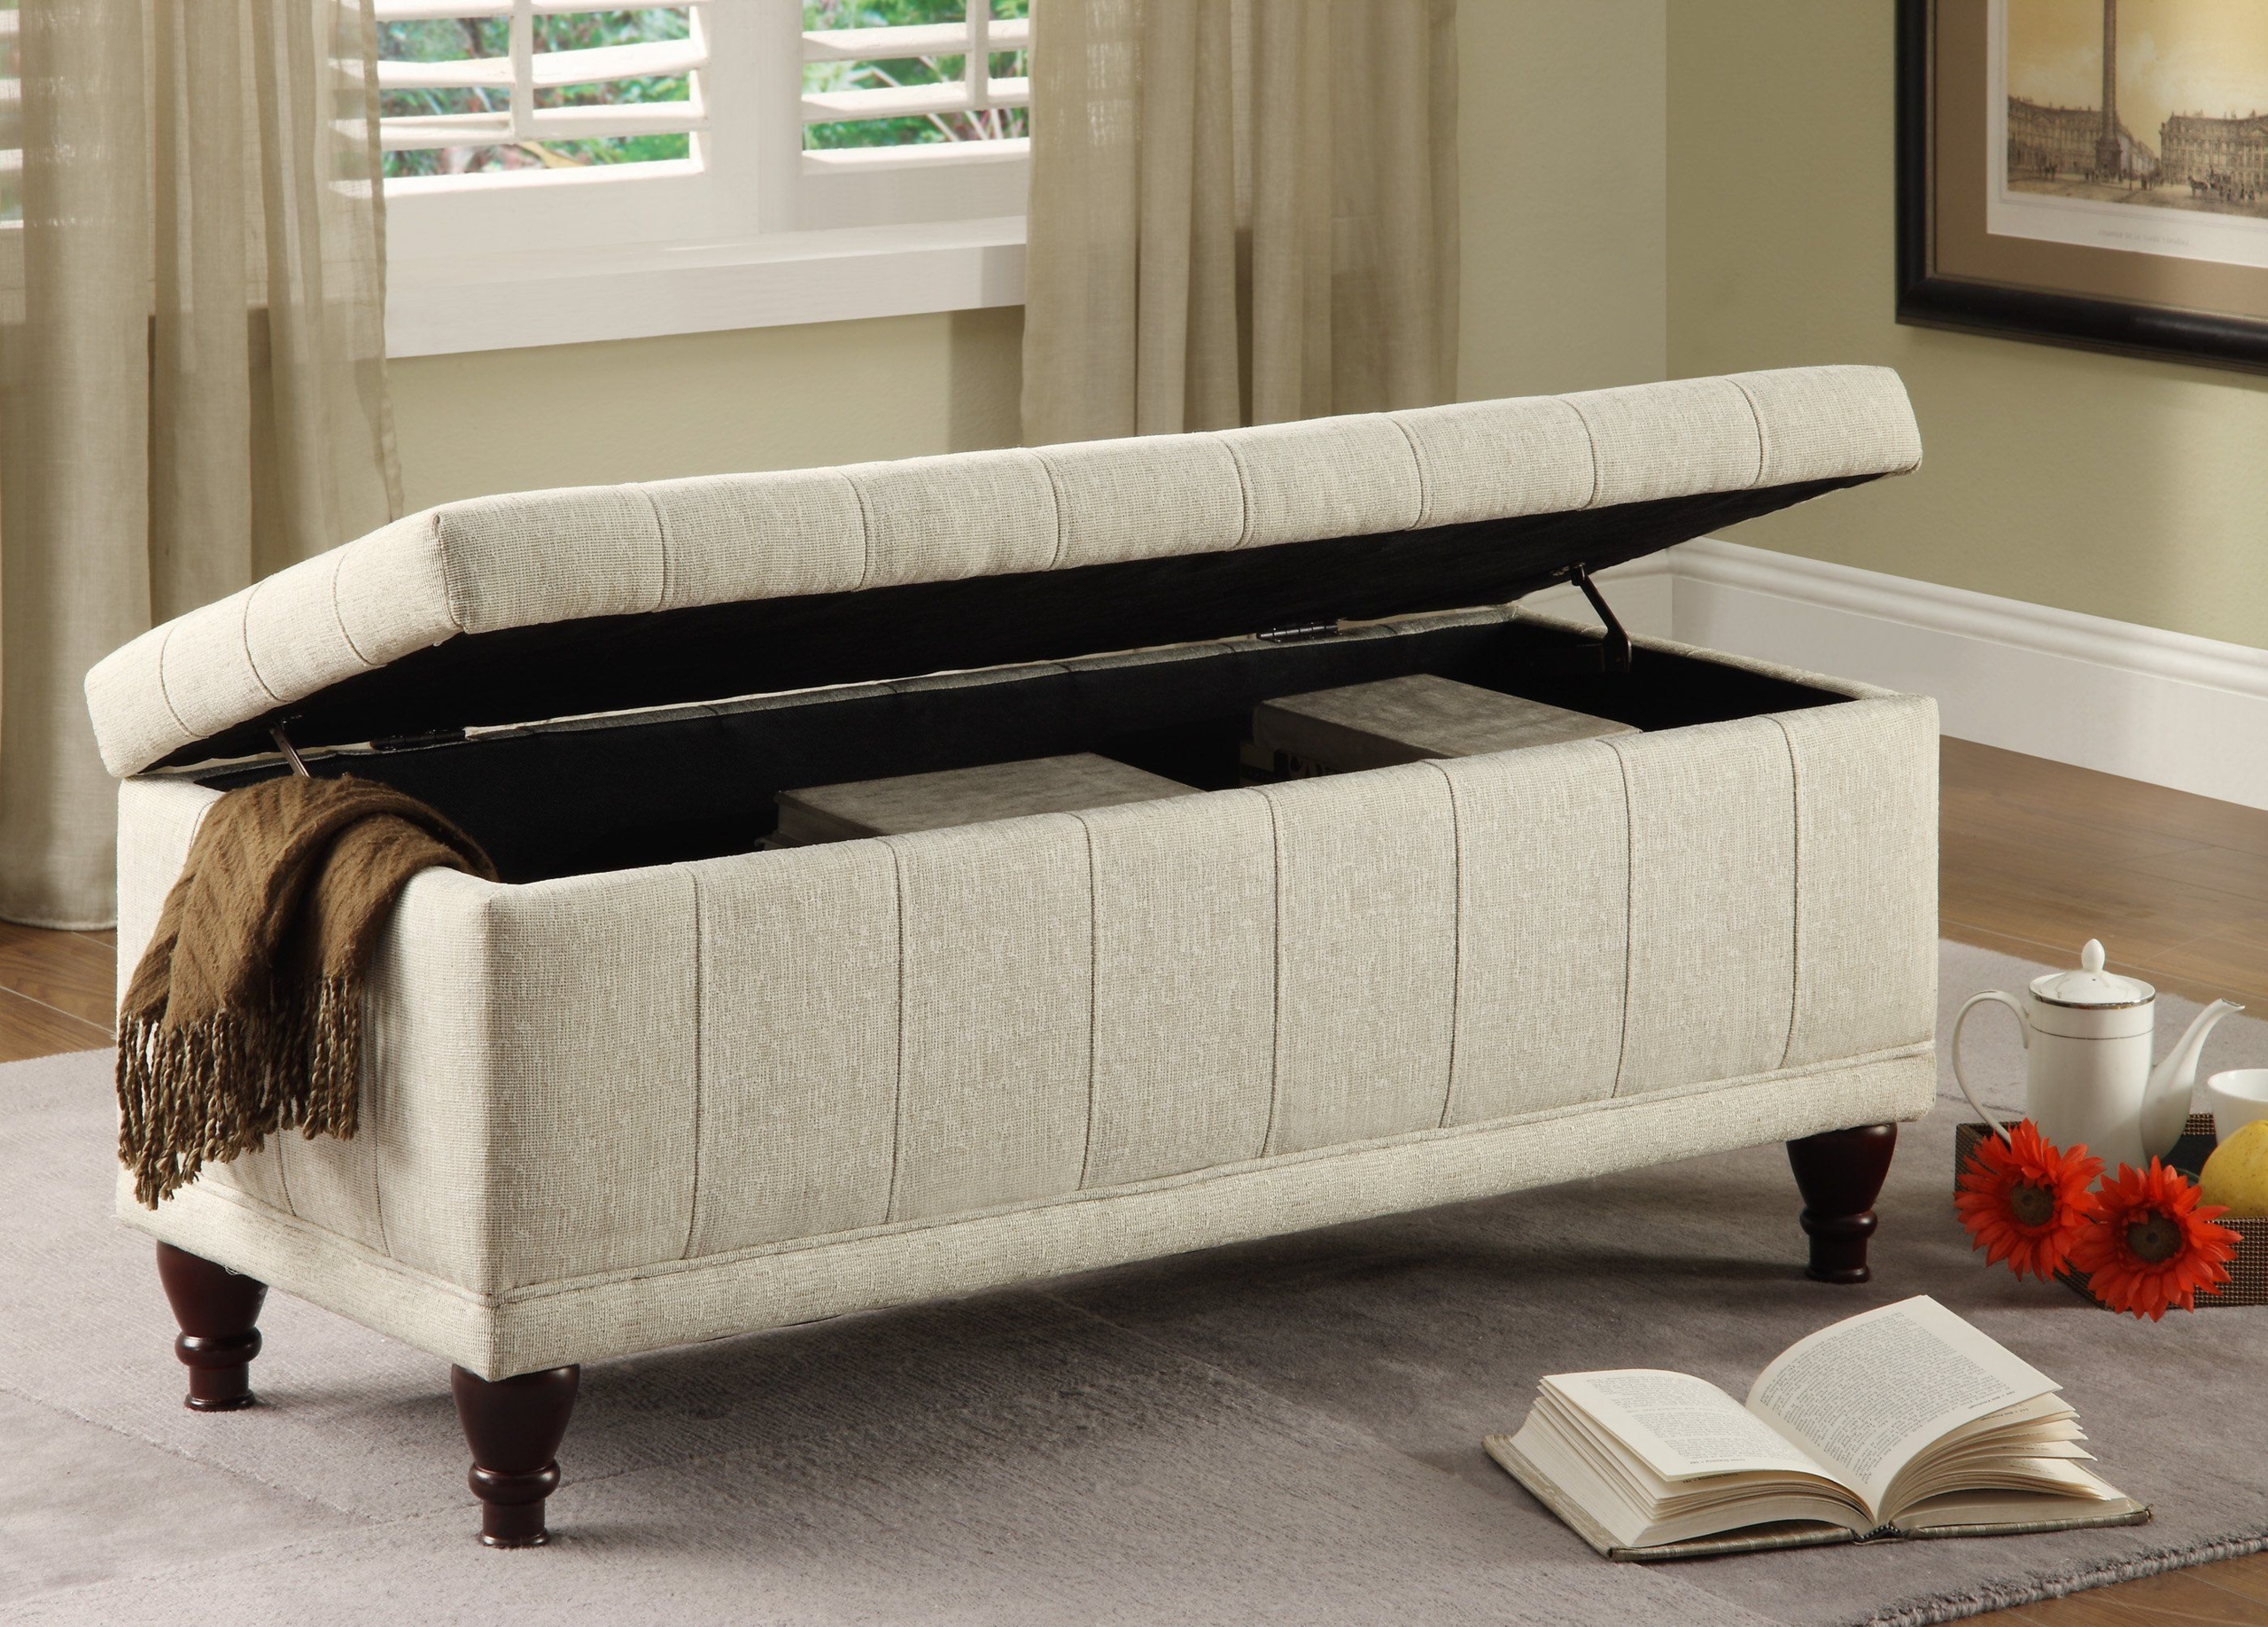 Homelegance 4730NF Lift Top Storage Bench with Tufted Accents, Beige Fabric